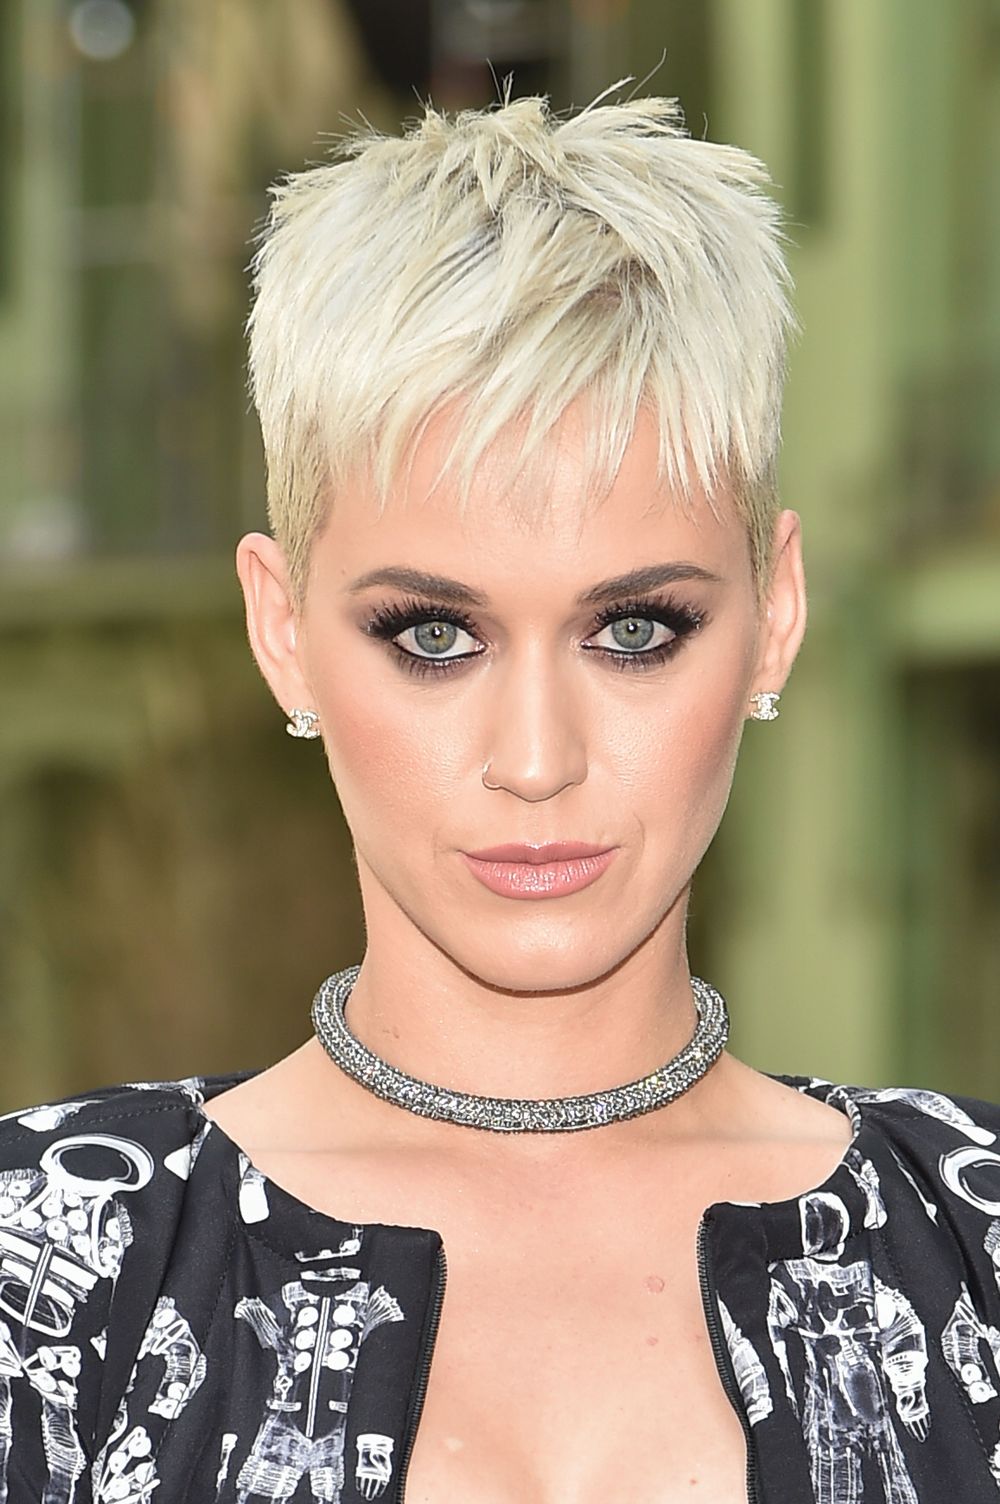 2021 Pixie Hair Trends: Get the Latest Inspiring Looks! - Themtraicay.com